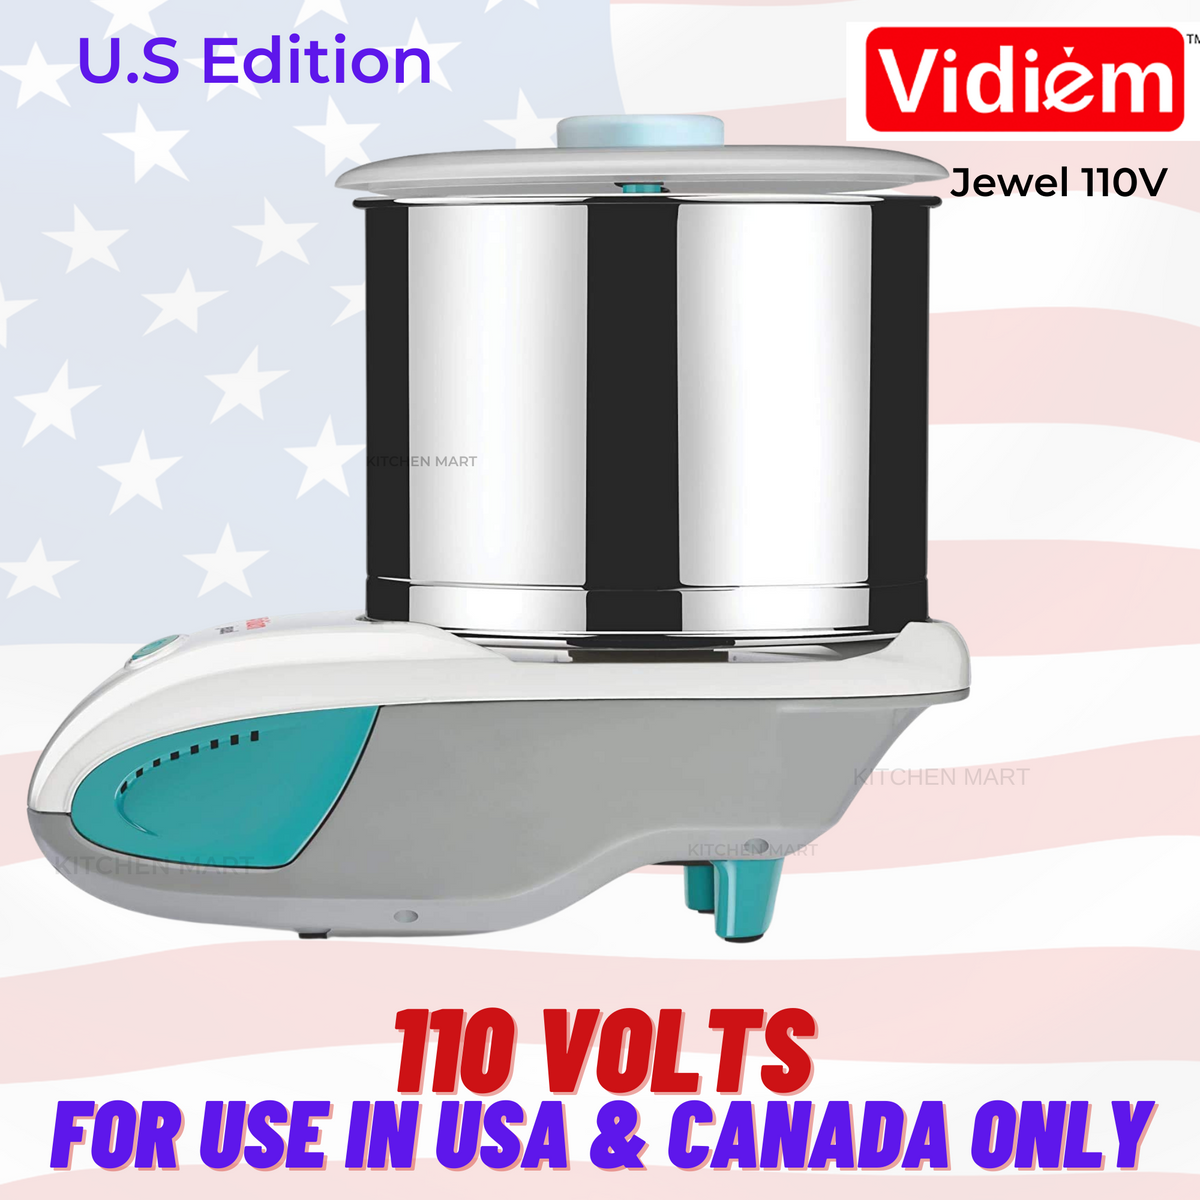 Vidiem Jewel Wet Grinder 110Volts for use in USA &amp; CAnada Only